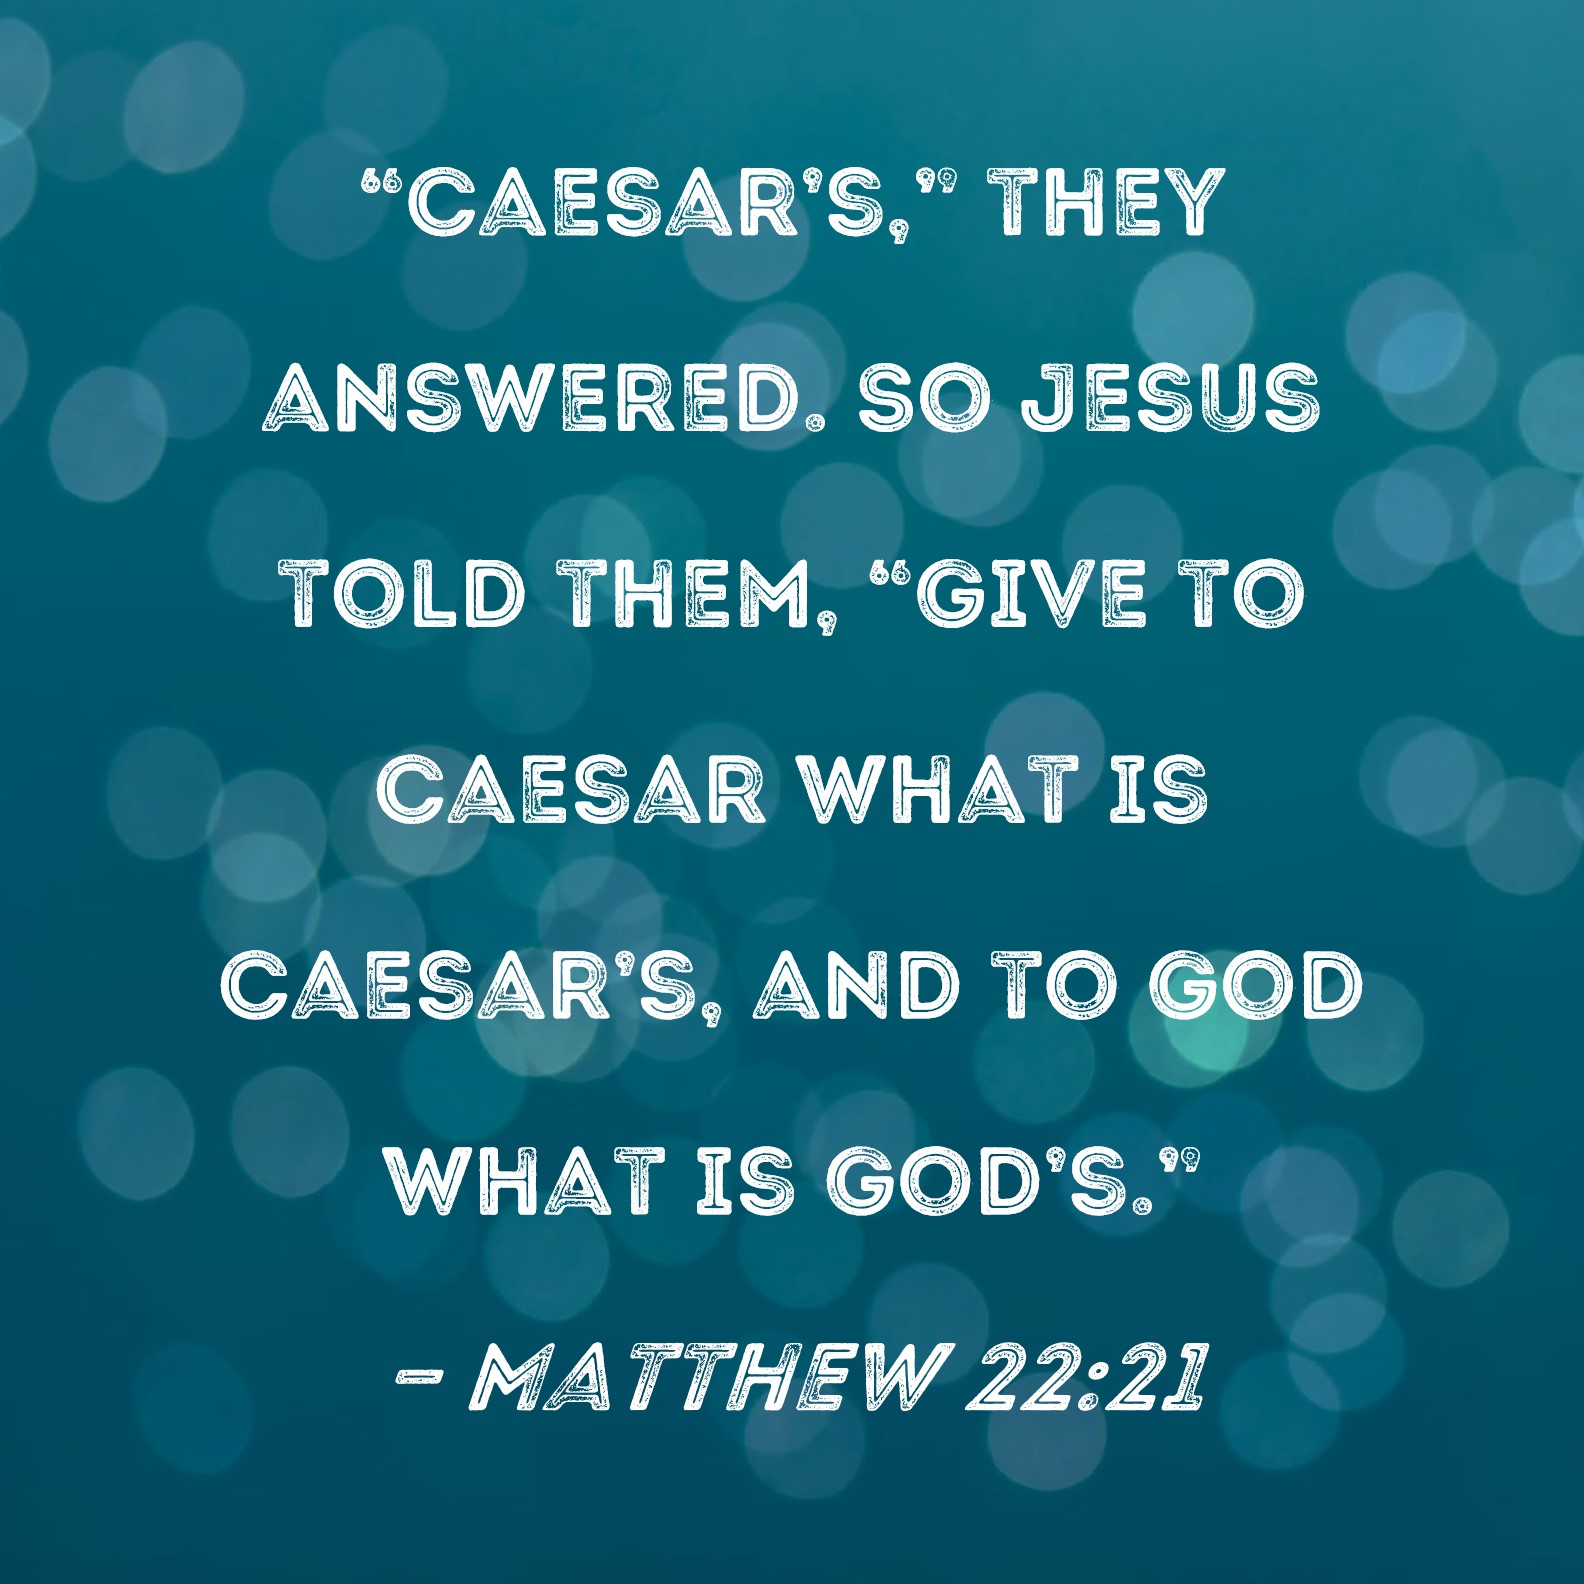 Matthew 22:21 "Caesar's," they answered. So Jesus told them, "Give to Caesar  what is Caesar's, and to God what is God's."